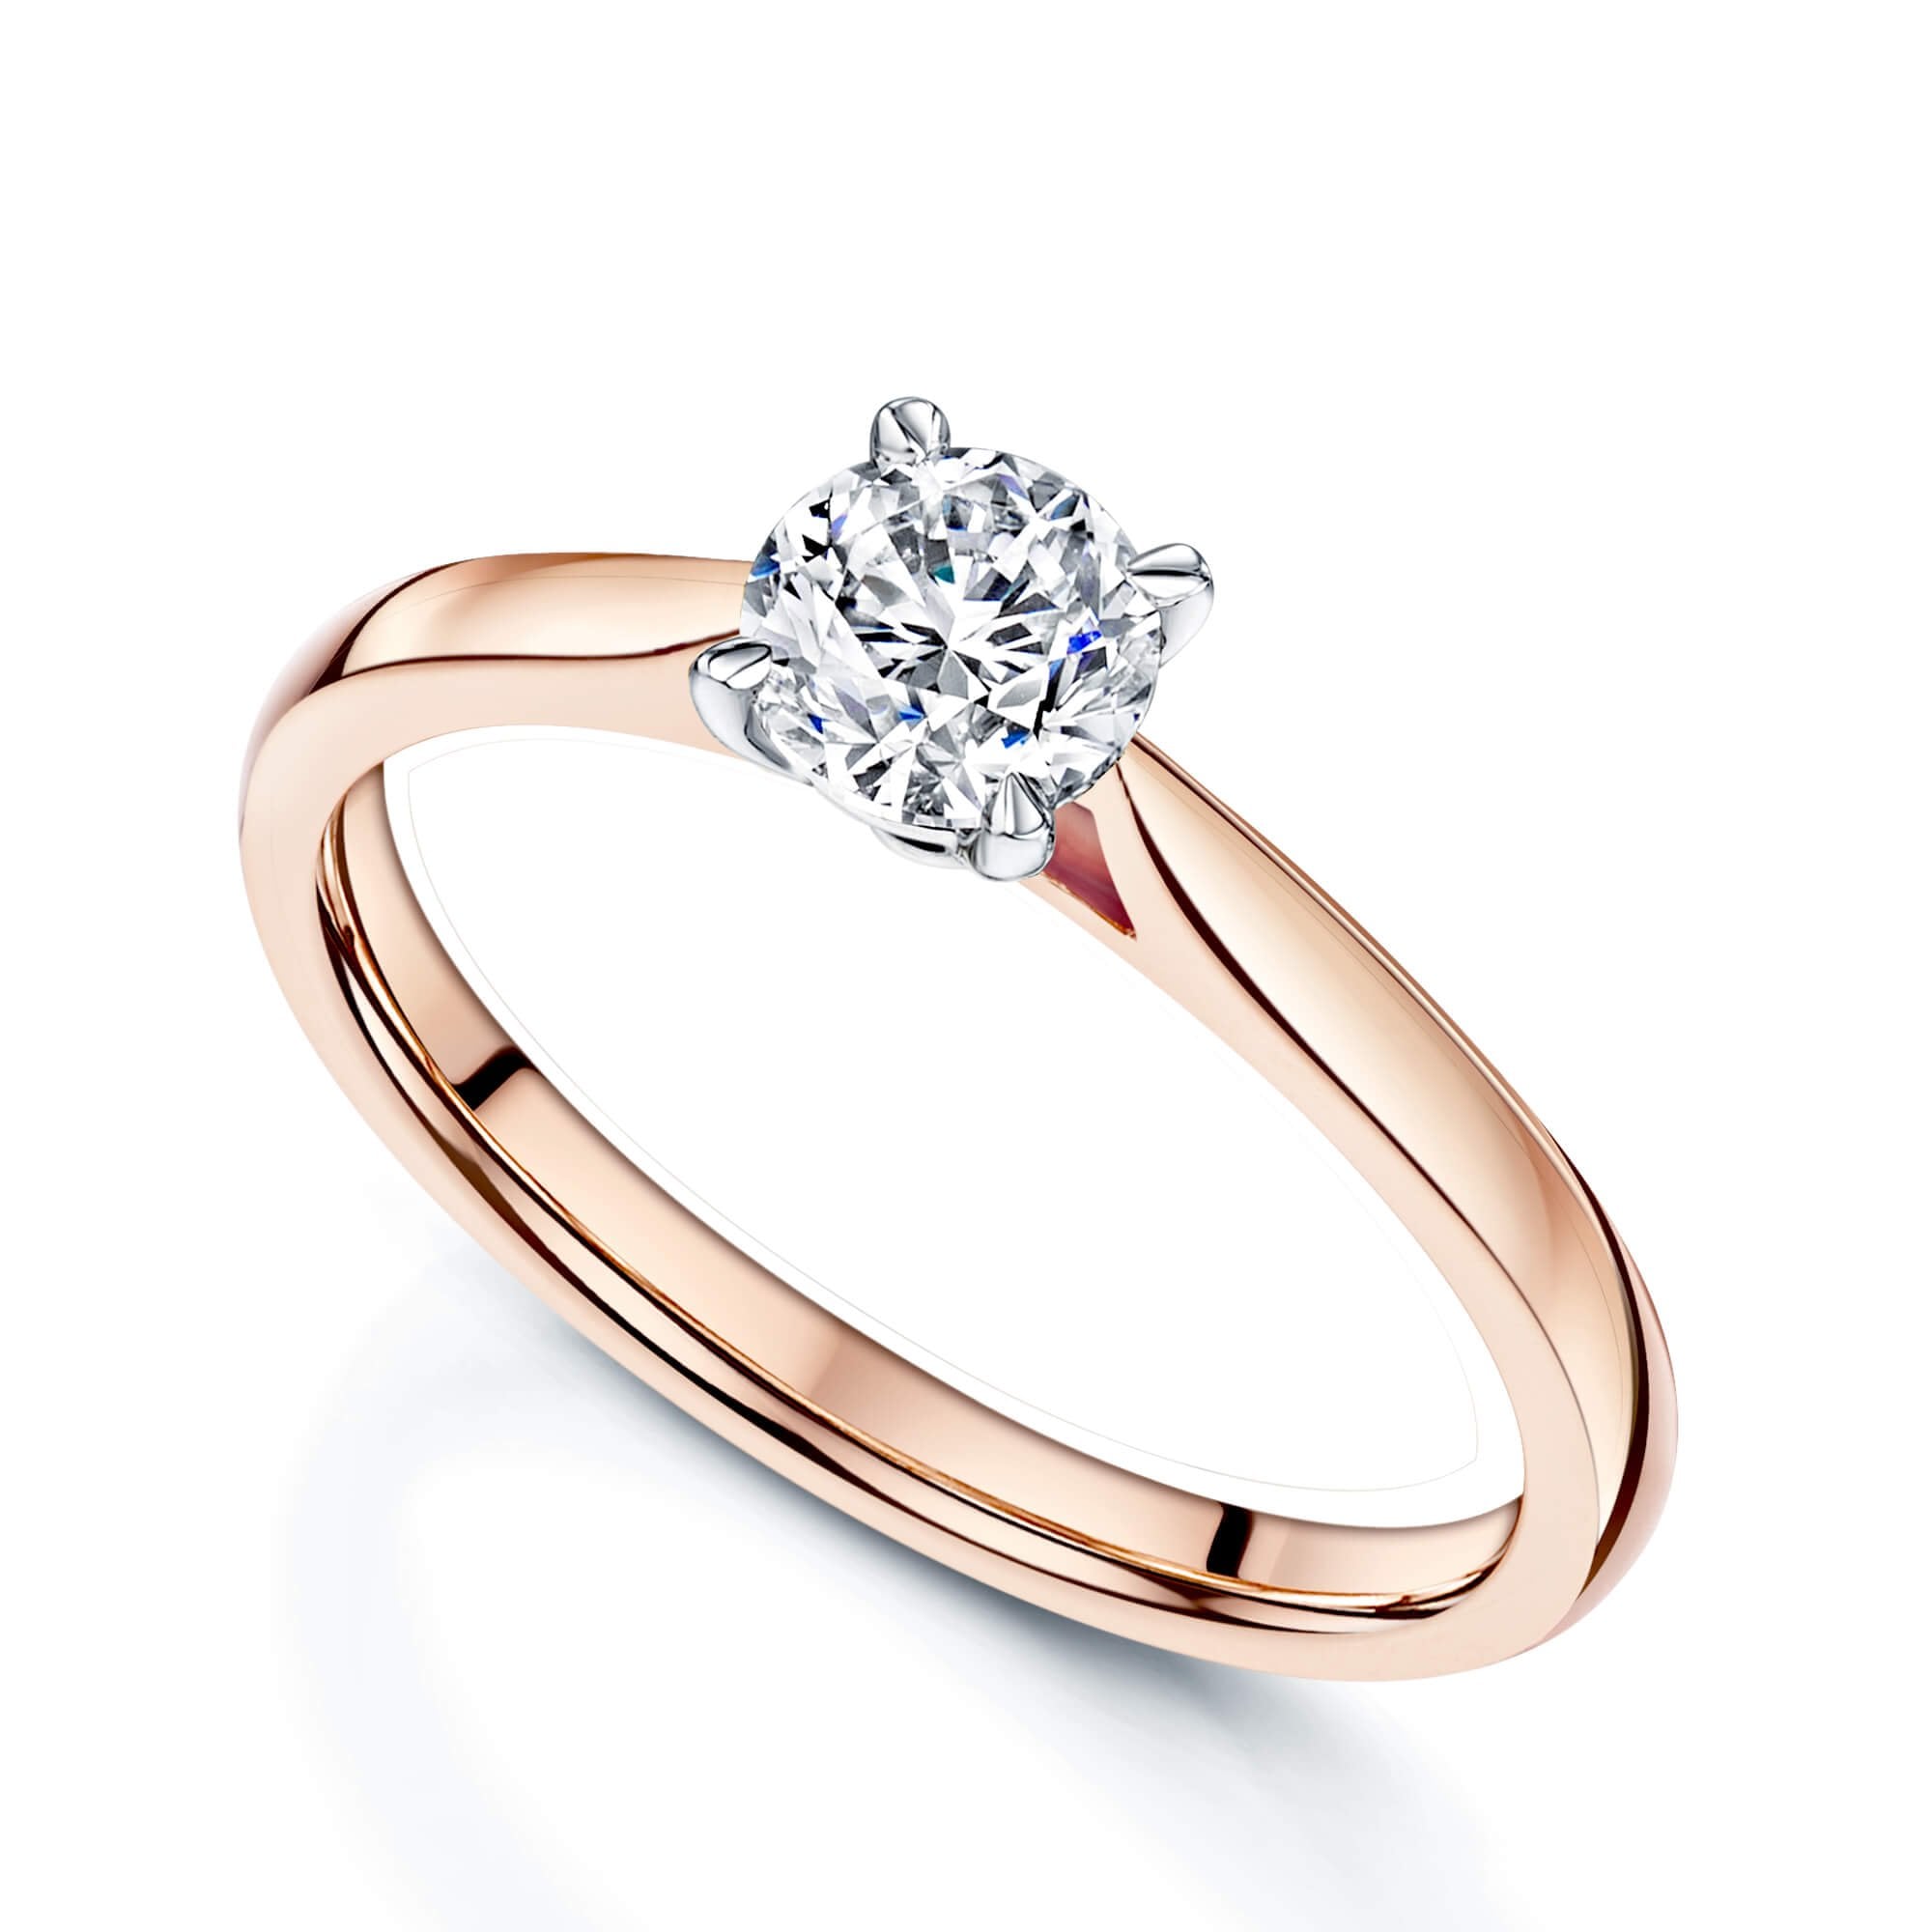 Simply Solitaire Collection 18ct Rose Gold Diamond Solitaire Engagement Ring GIA Certified 0.50 Carat